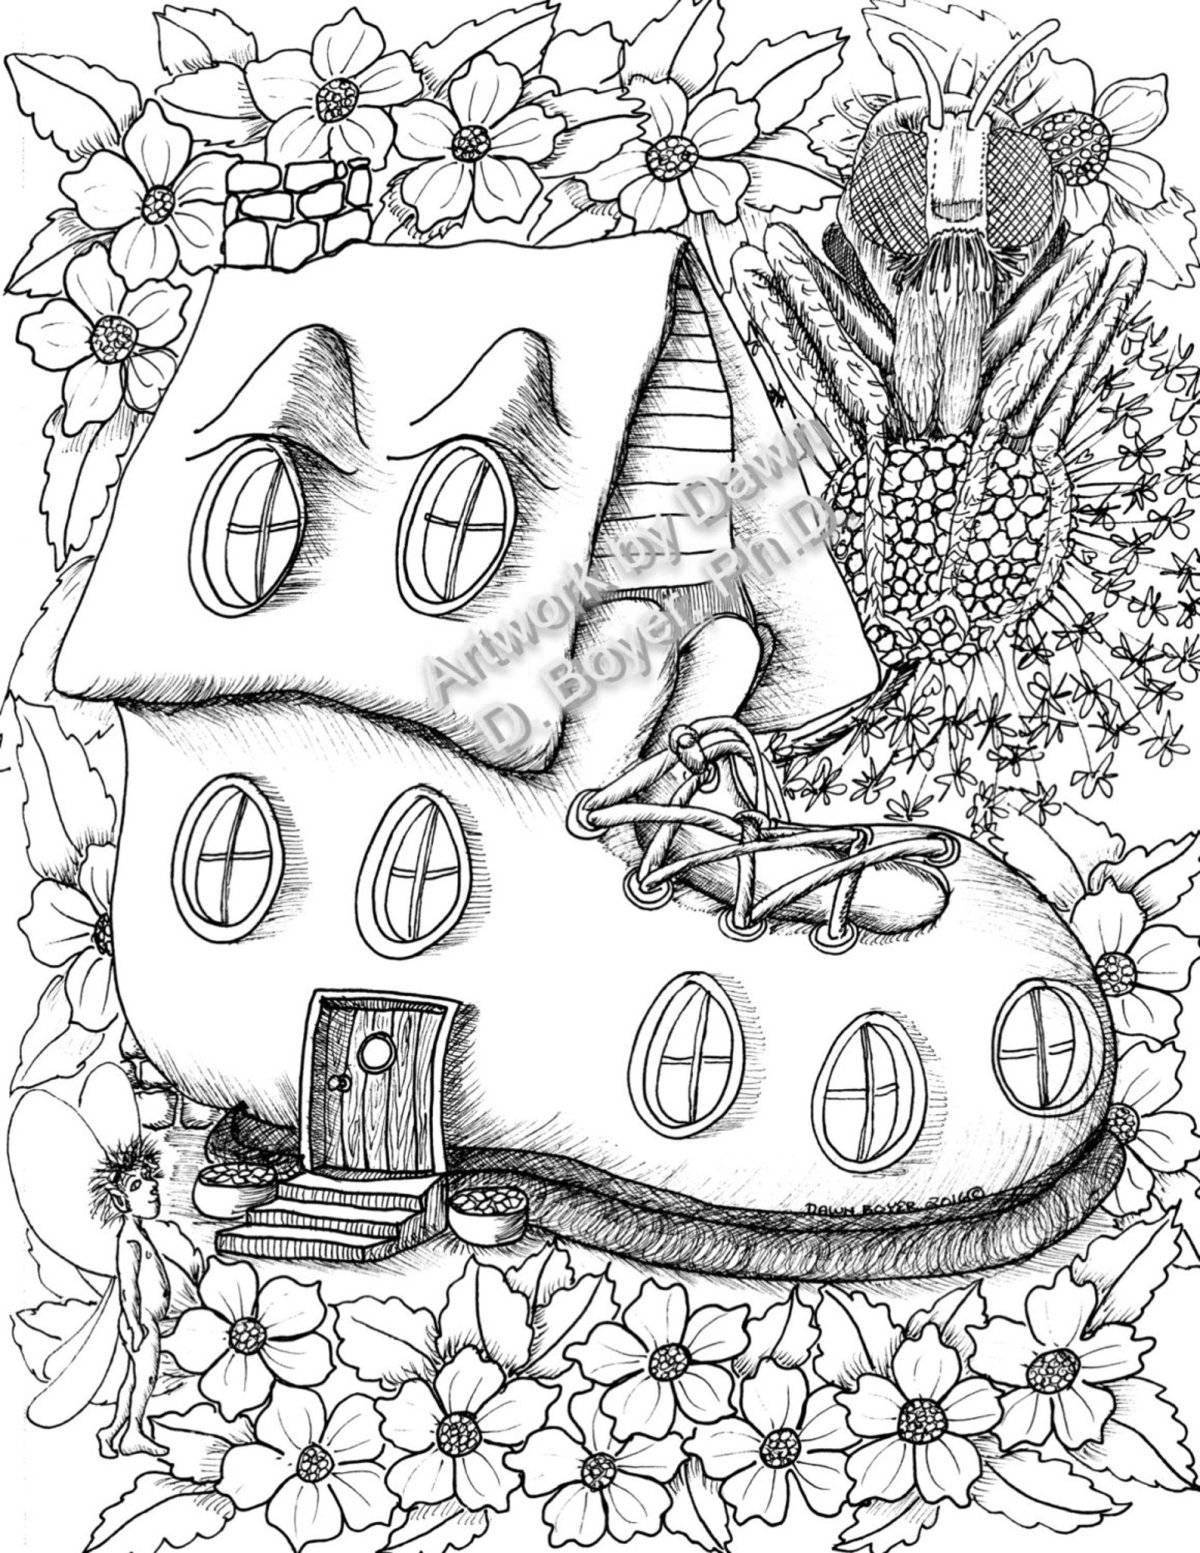 Coloring page gorgeous fairytale house